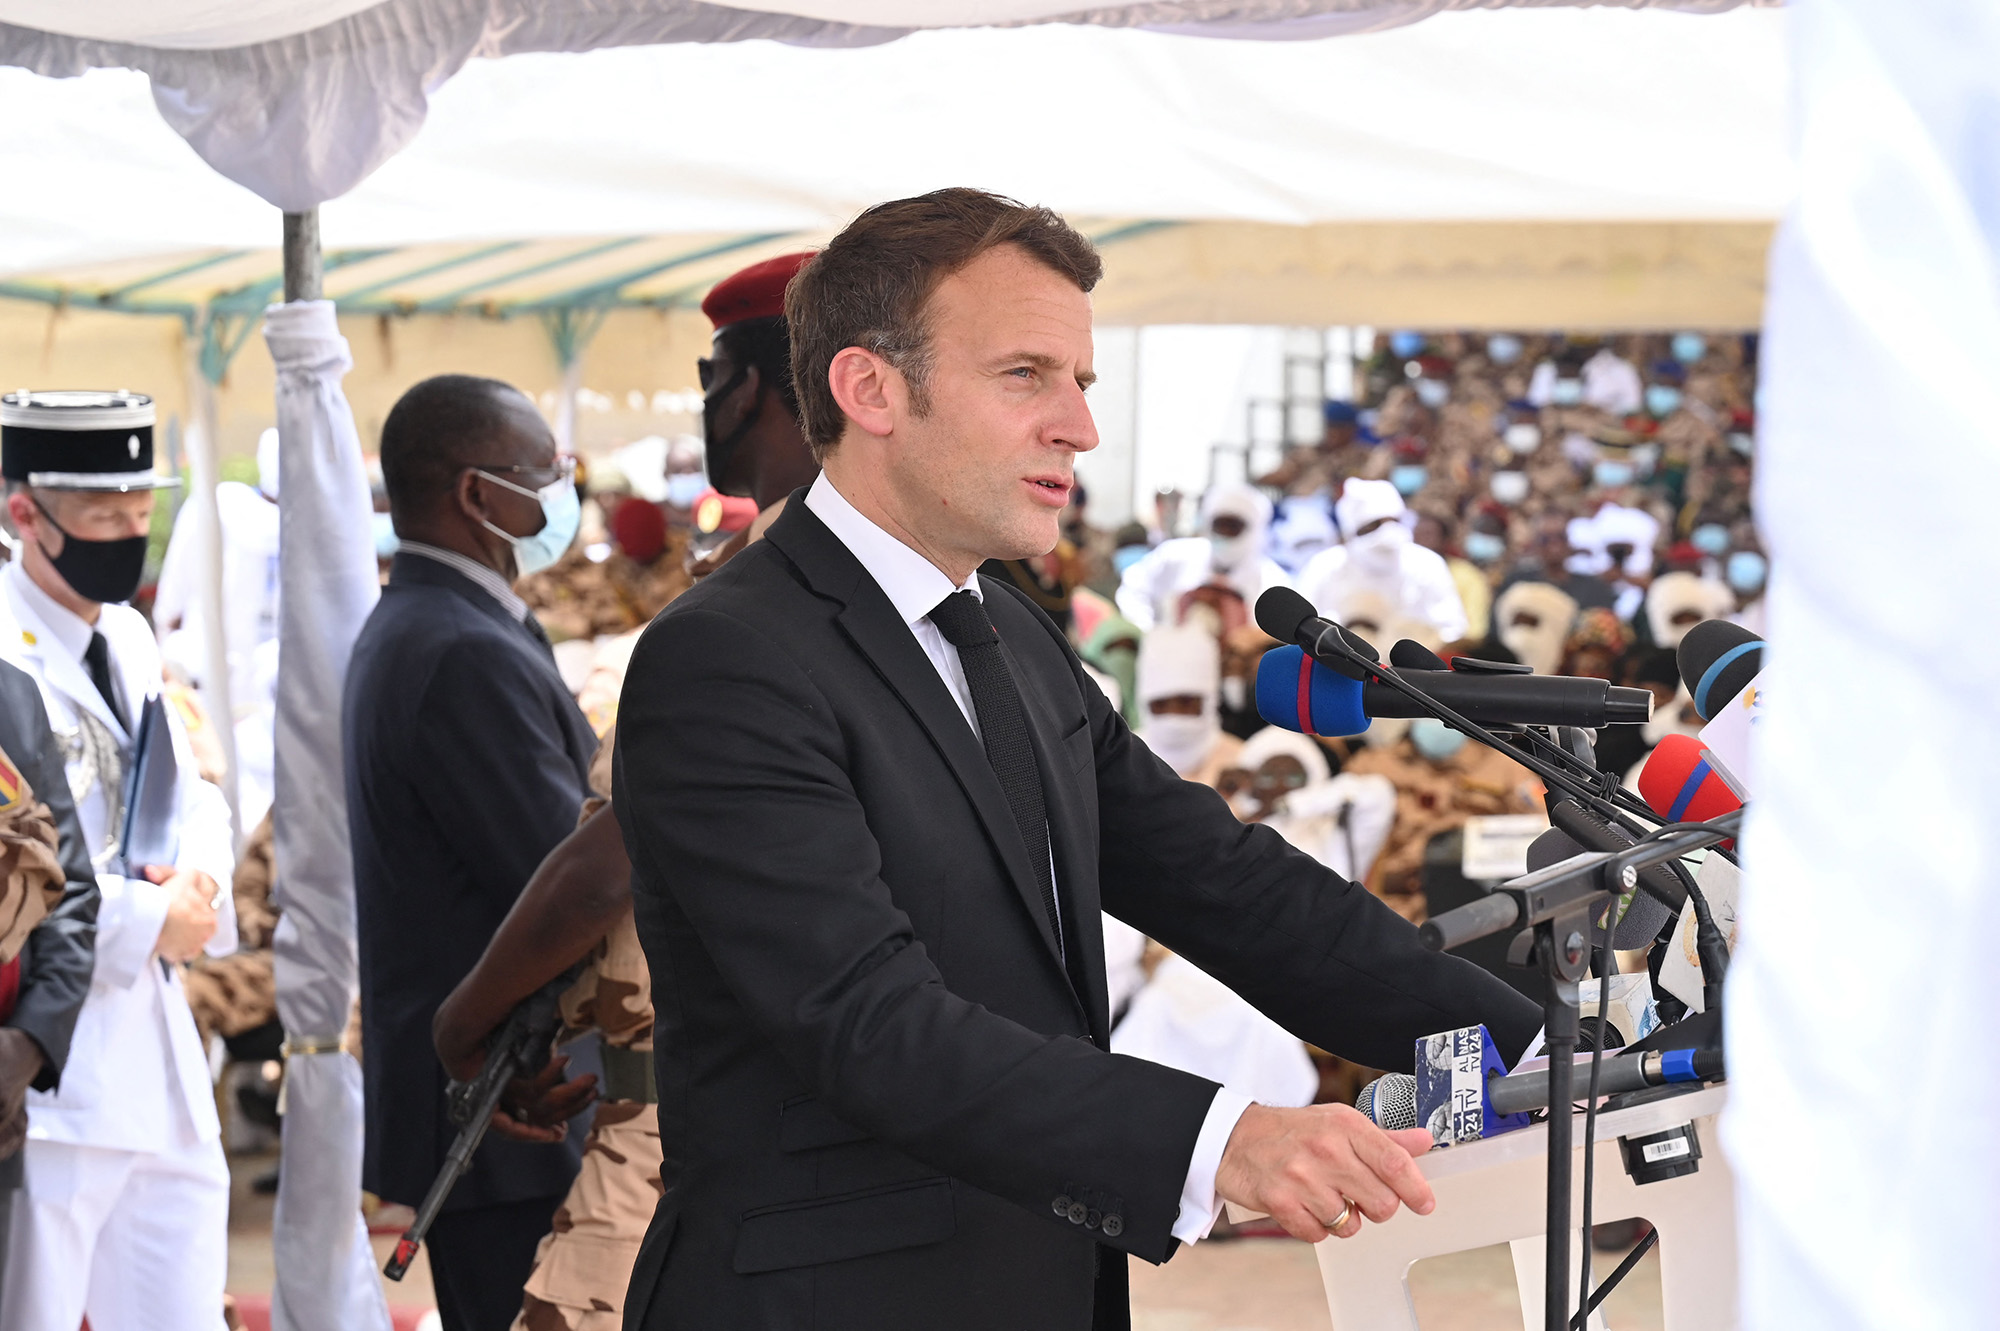 Emmanuel Macron delivers a speech during the state funeral for Chadian President Idriss Deby in N'Djamena on April 23.